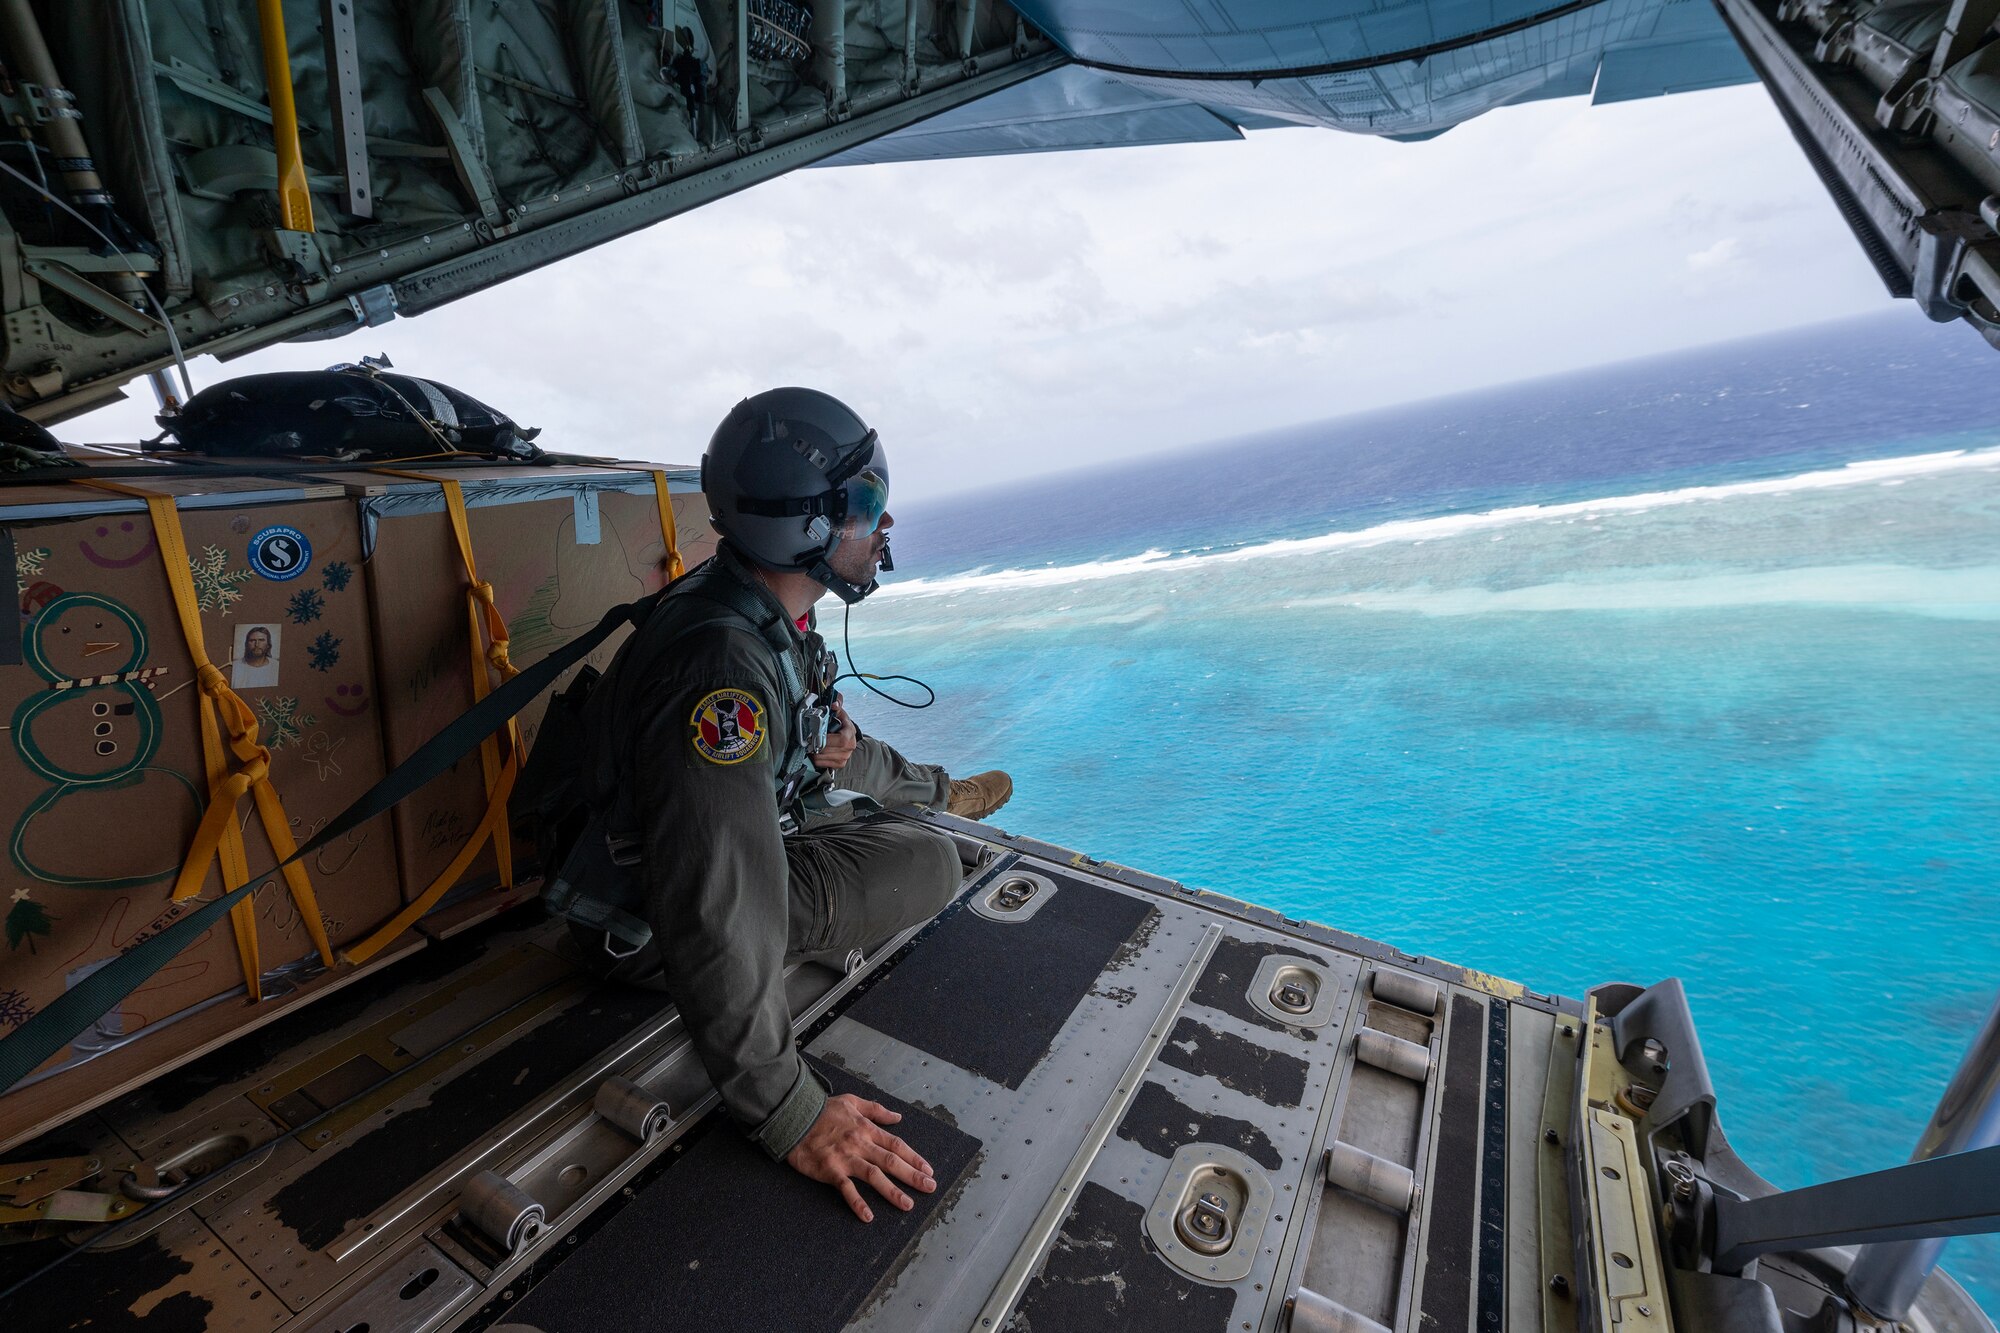 U.S. Air Force Airman 1st Class Cameron Palmer, 36th Expeditionary Airlift Squadron C-130J loadmaster, conducts a visual confirmation over Asor atoll in the Caroline Islands of the western Pacific Ocean